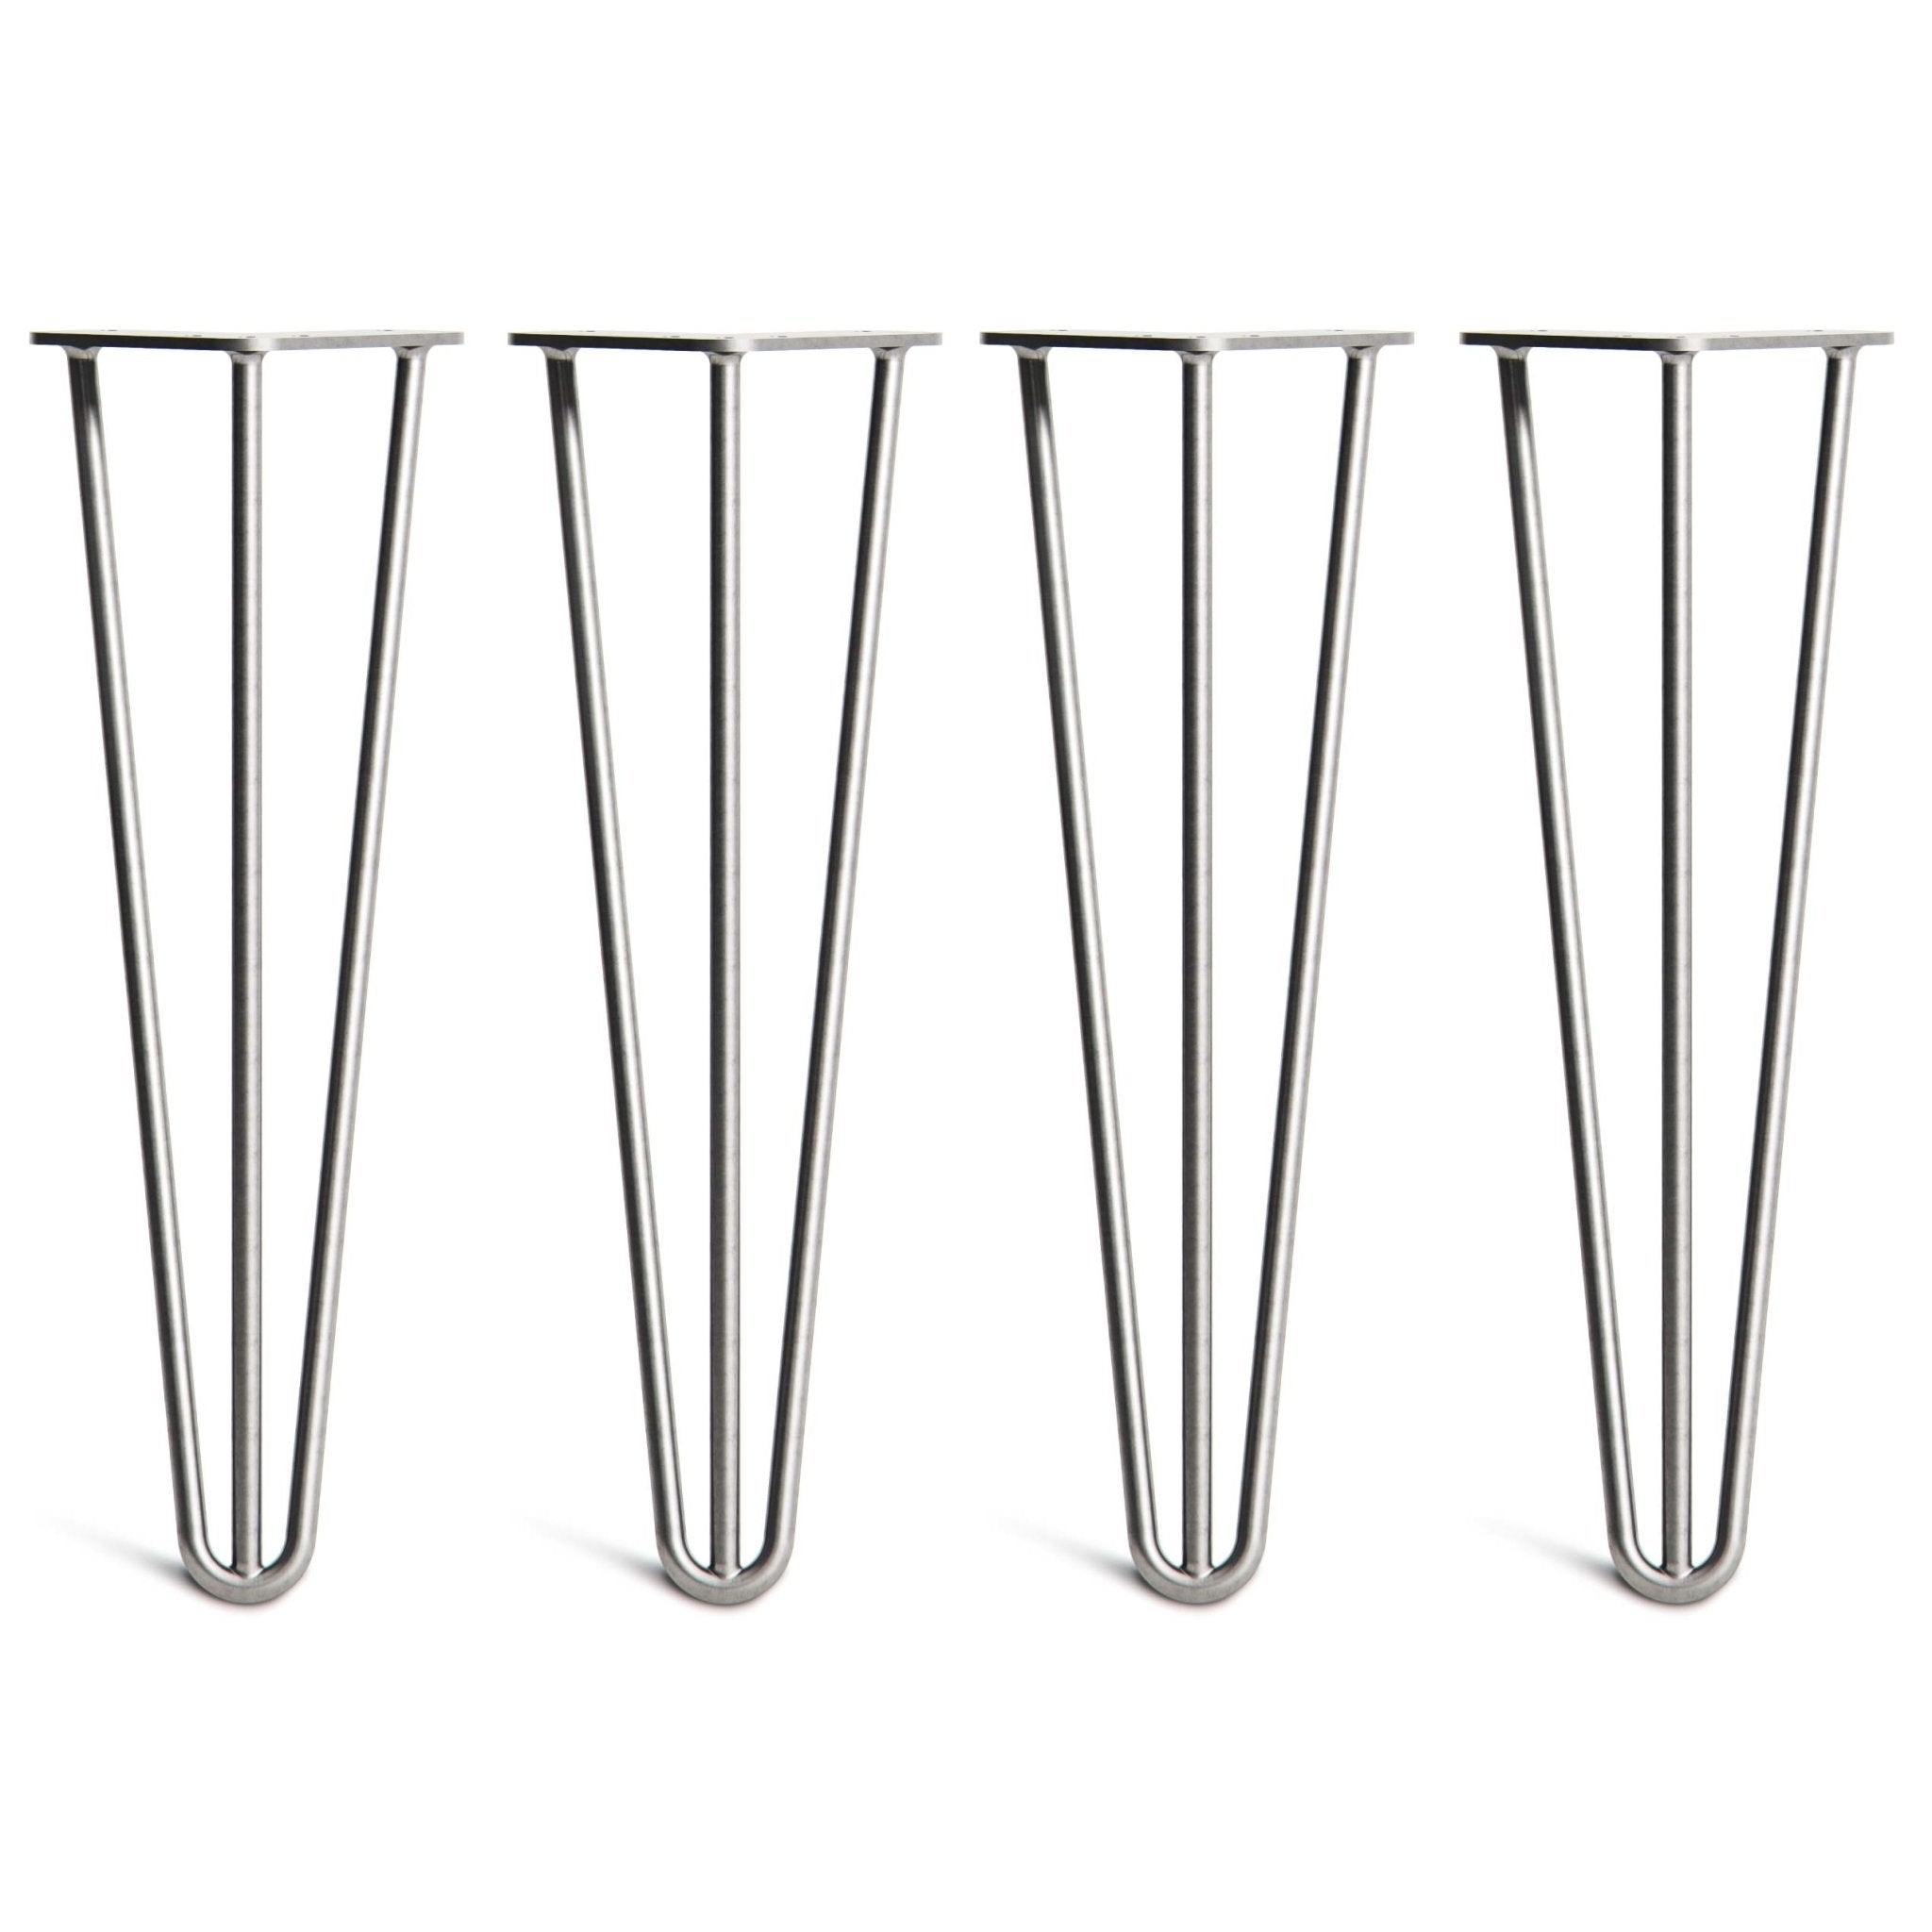 40cm Hairpin Legs - Bench-3 Rod-Stainless Steel-The Hairpin Leg Co.